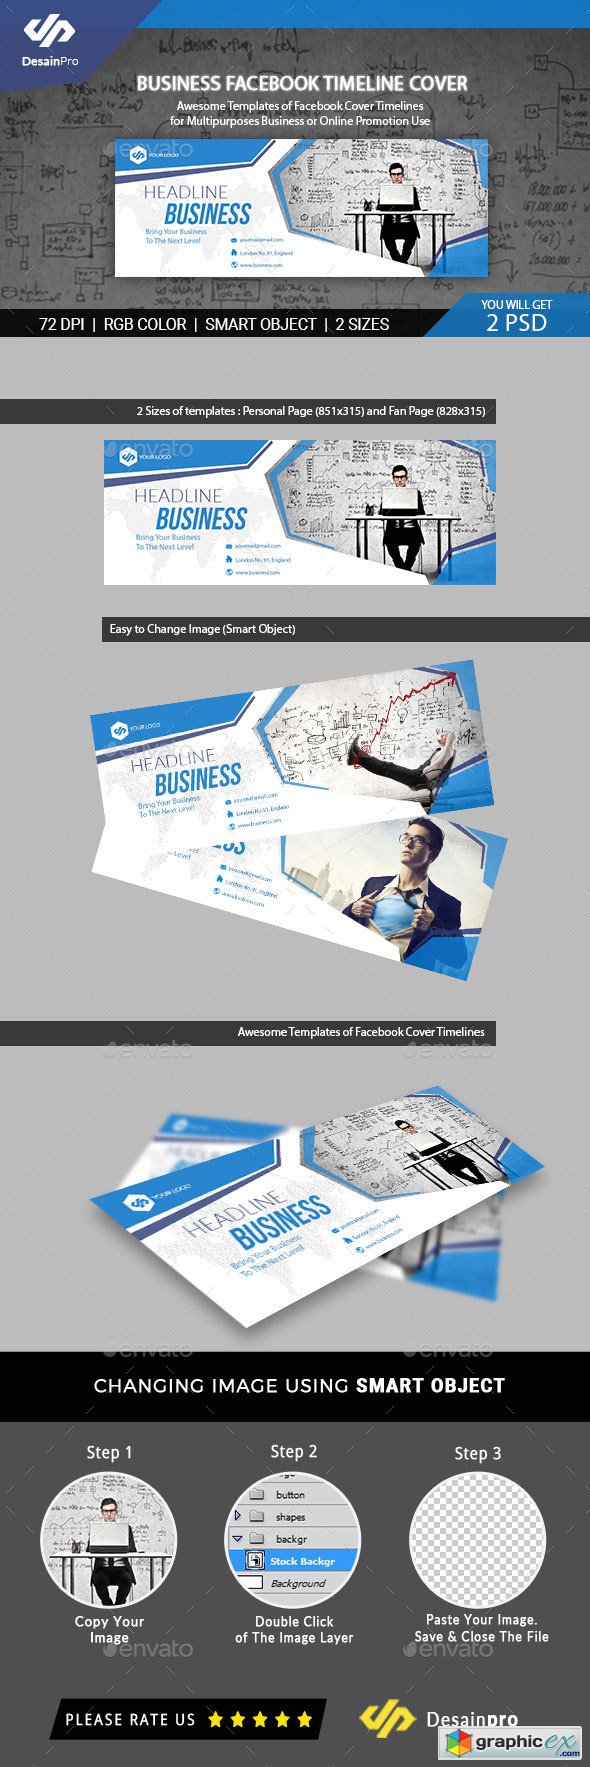 Awesome Business Facebook Cover Templates